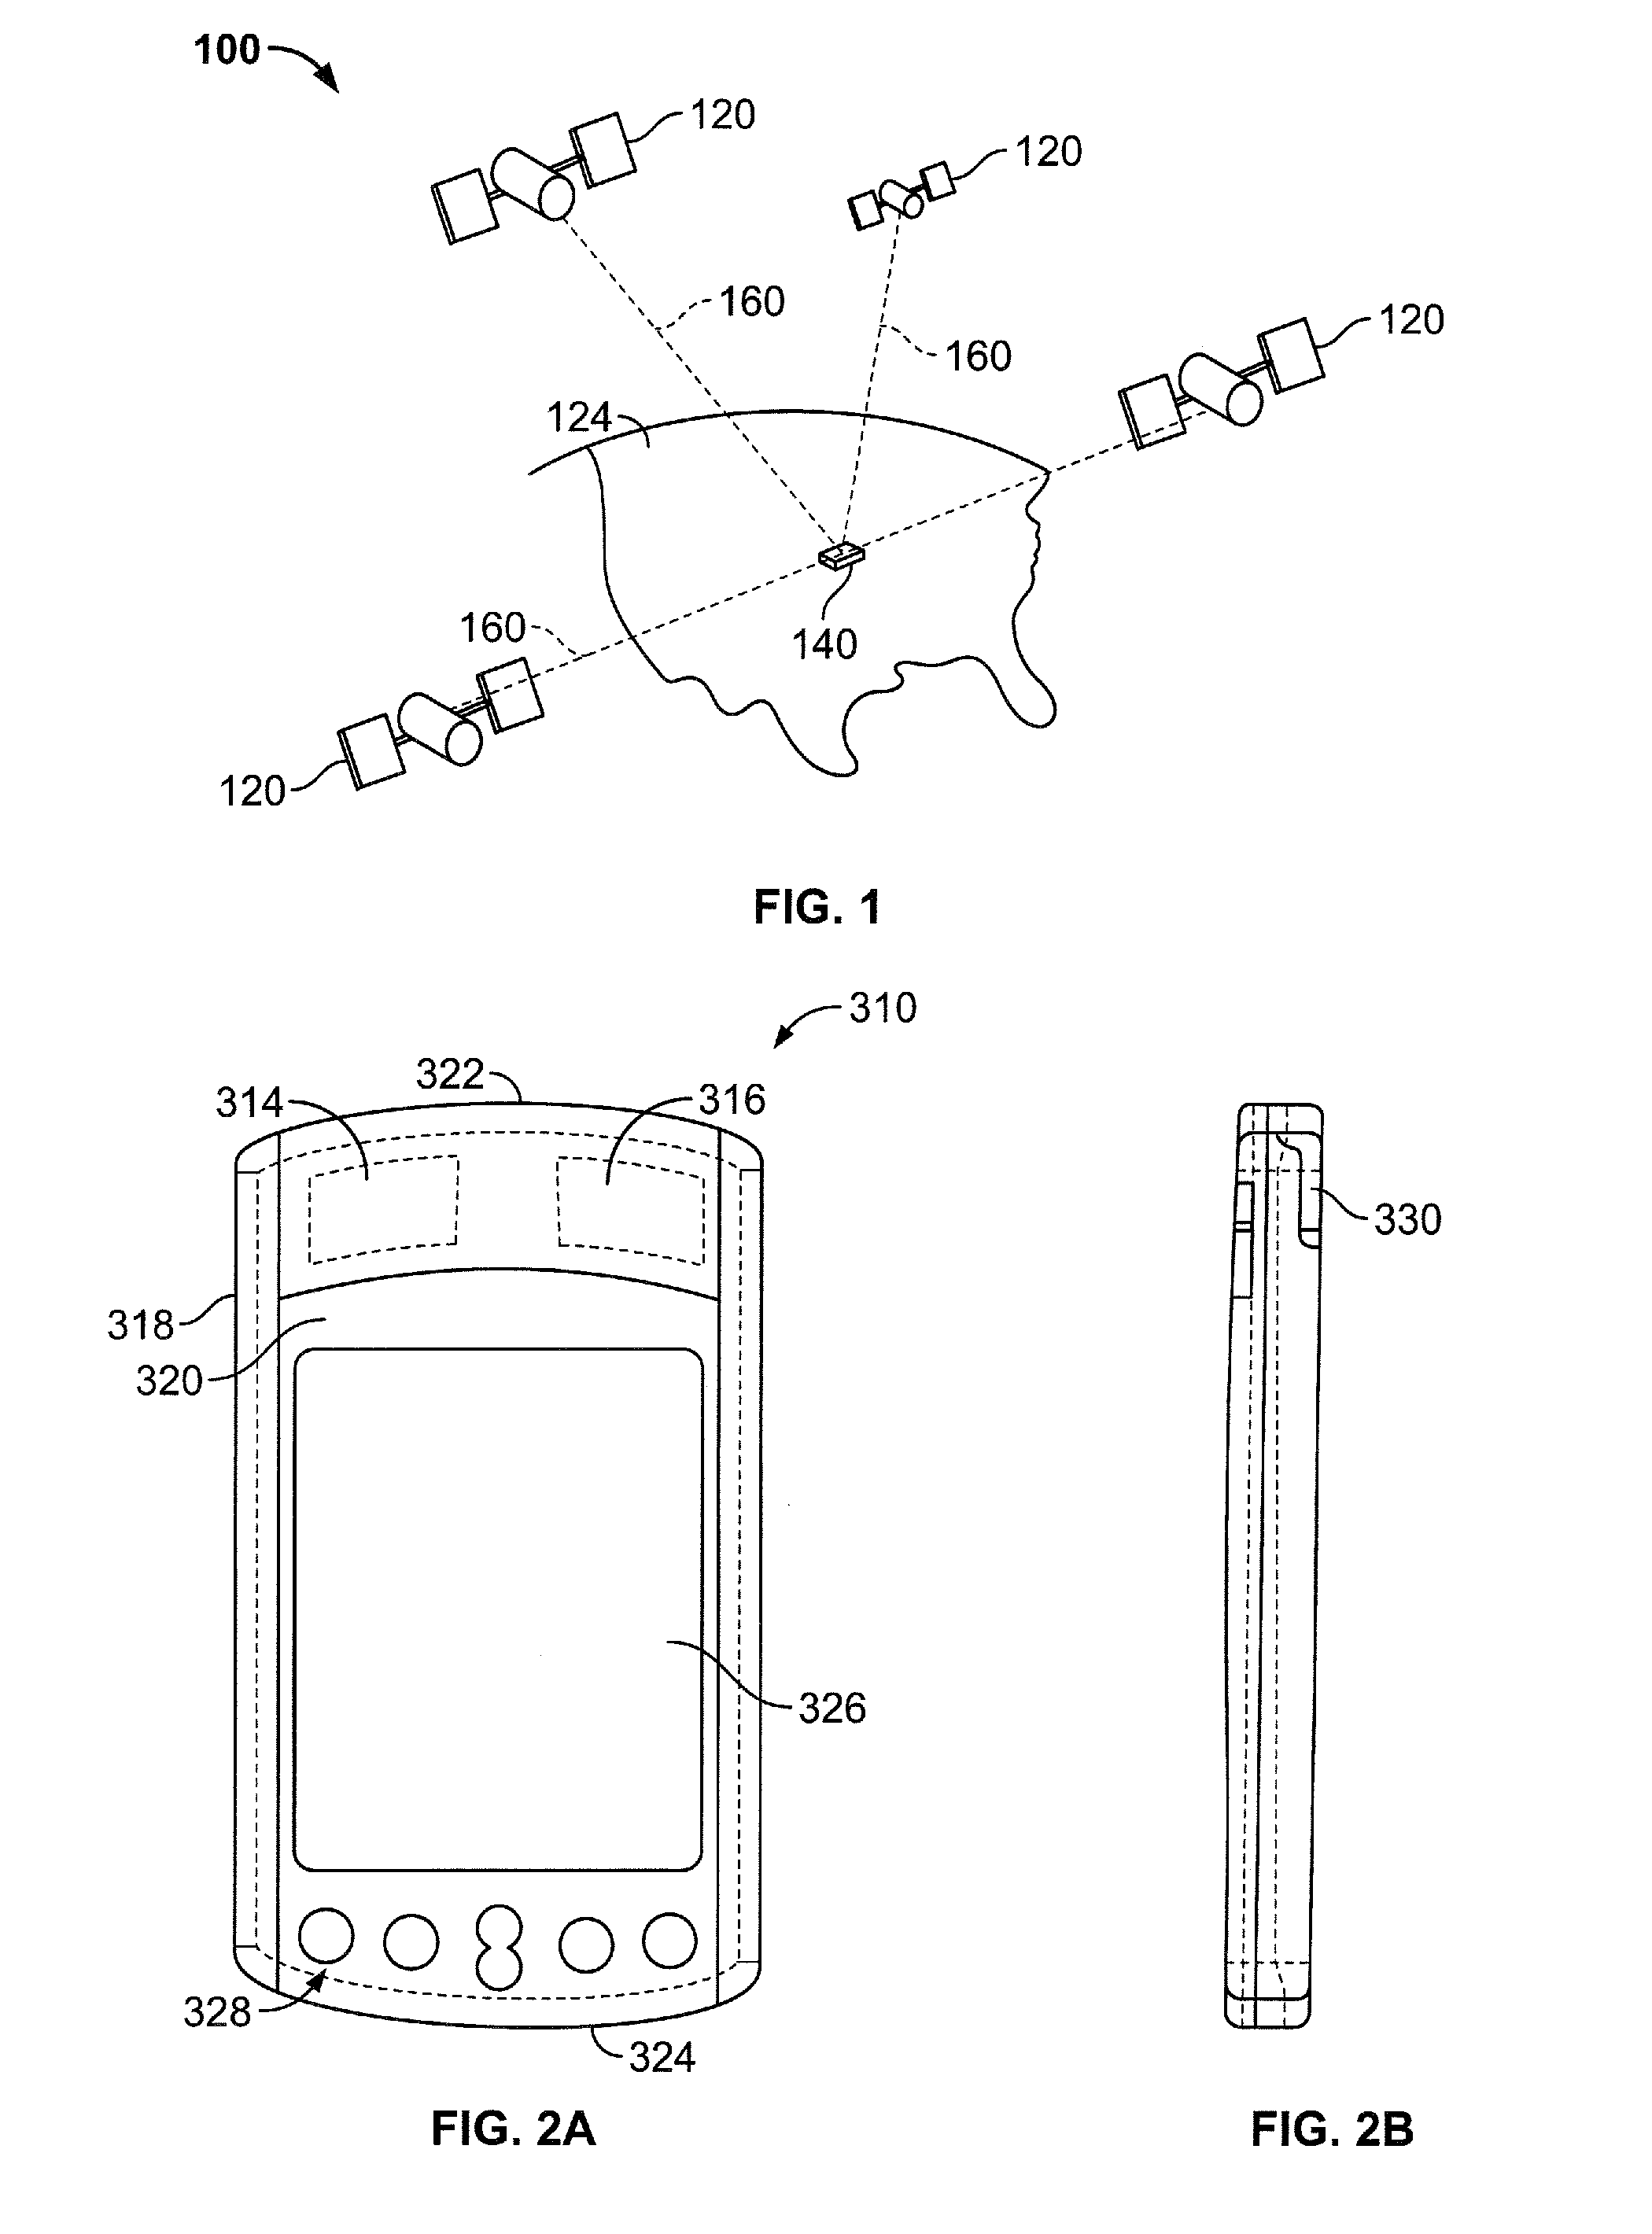 Personal navigational device and method with automatic call-ahead